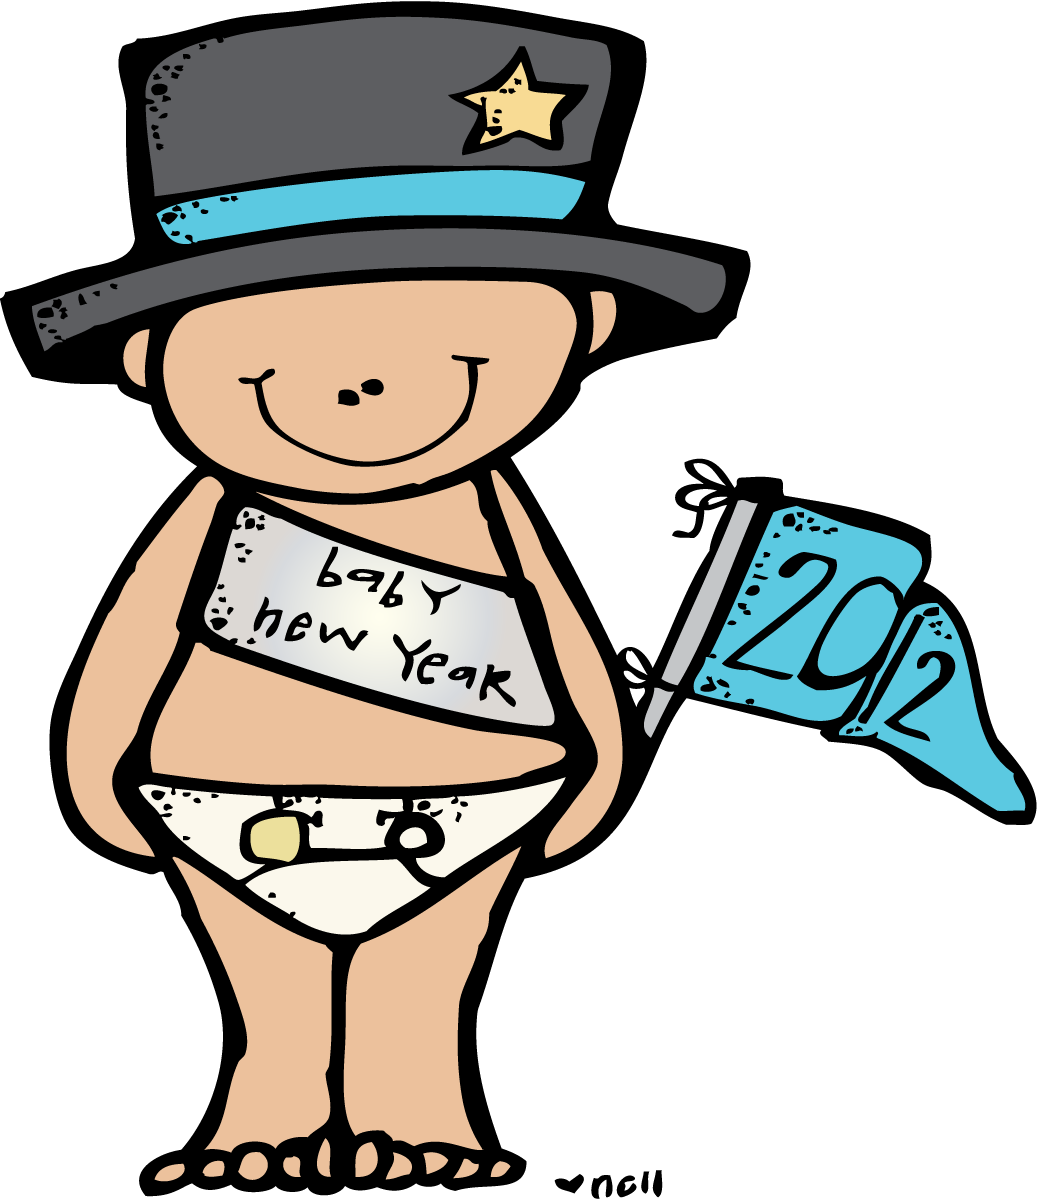 baby new year pictures clip art - photo #4